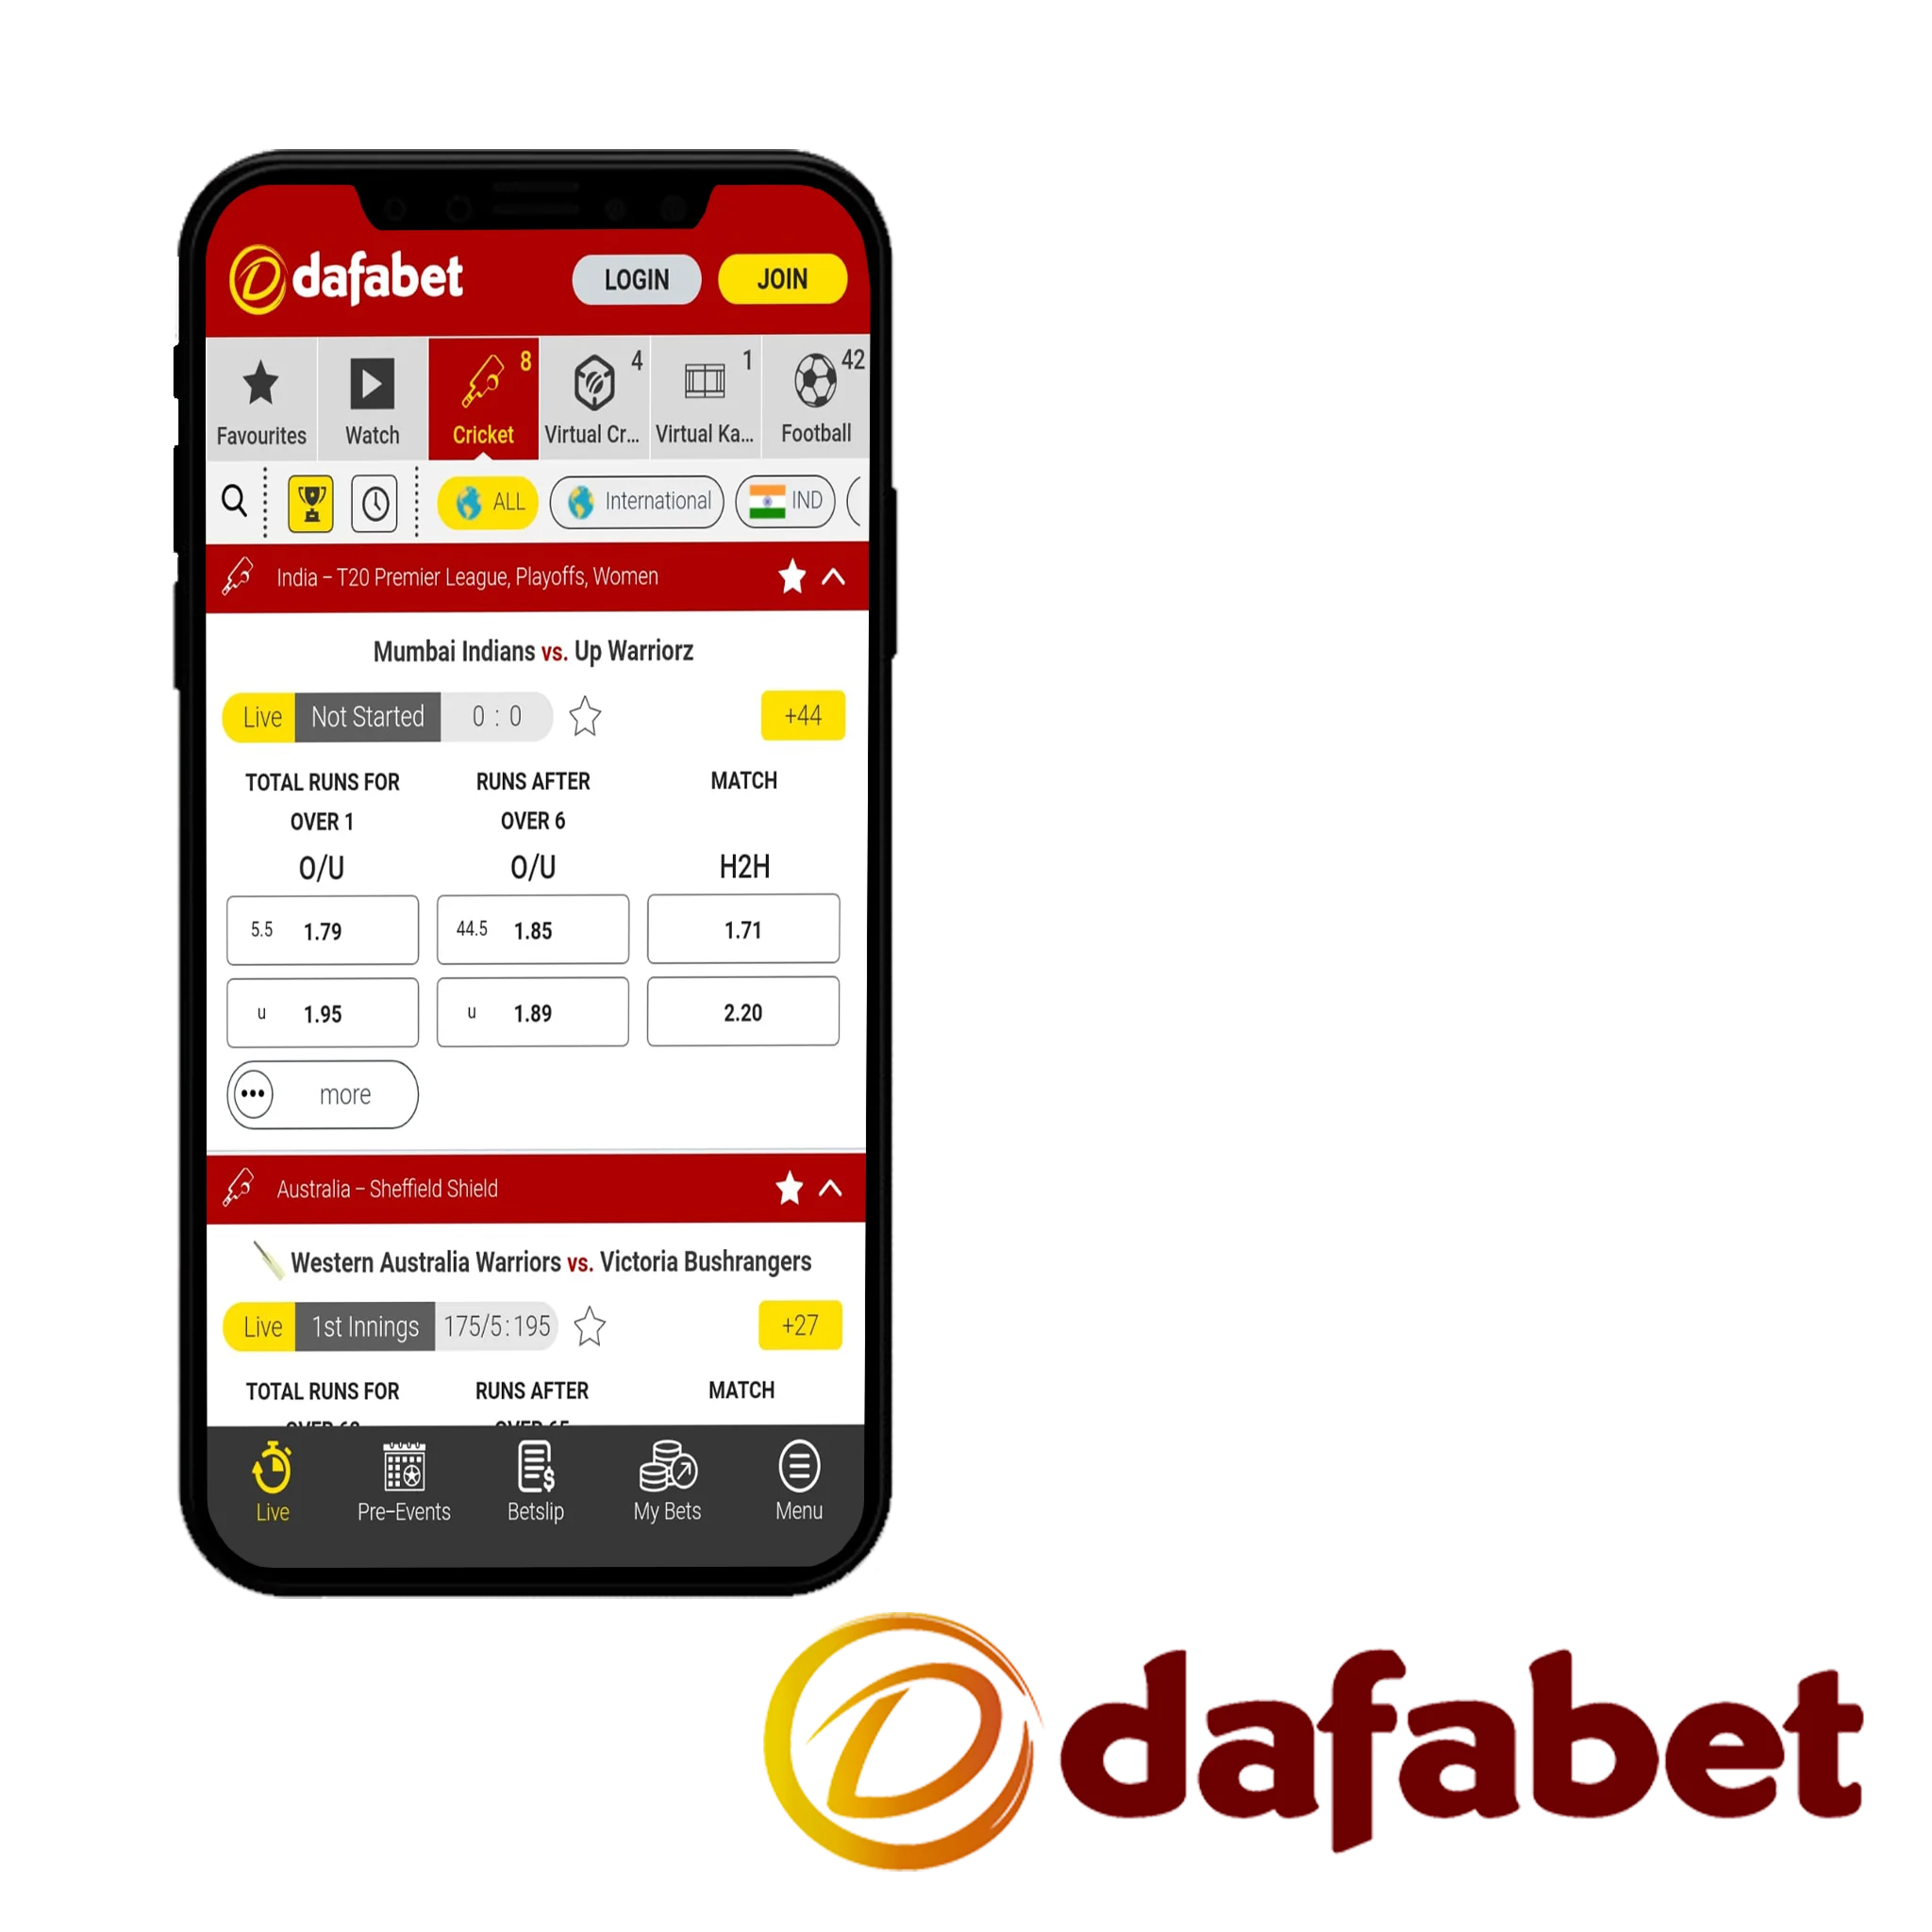 The Dafabet app provides various payment options.